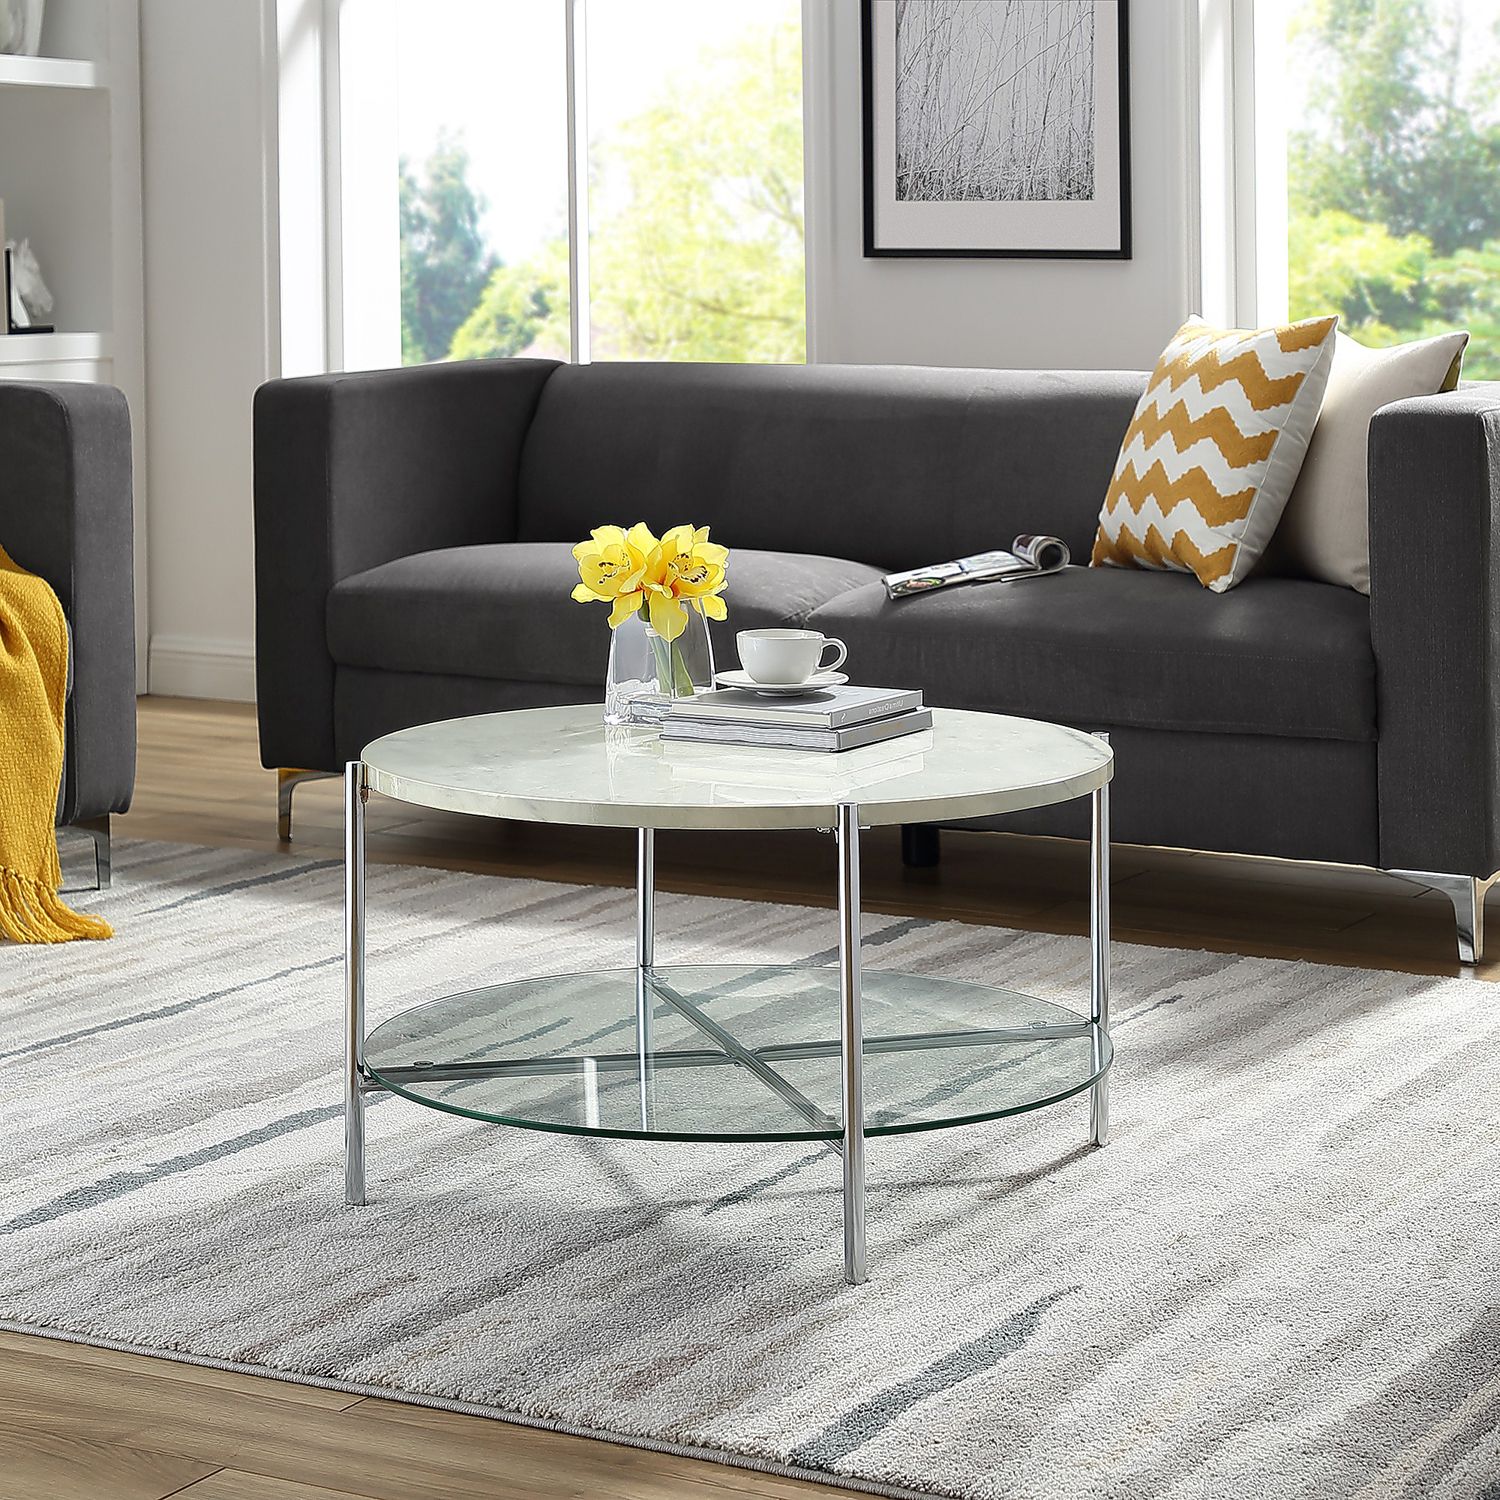 Faux Marble Round Coffee Table – Pier1 Inside 2020 Faux White Marble And Metal Coffee Tables (Gallery 18 of 20)